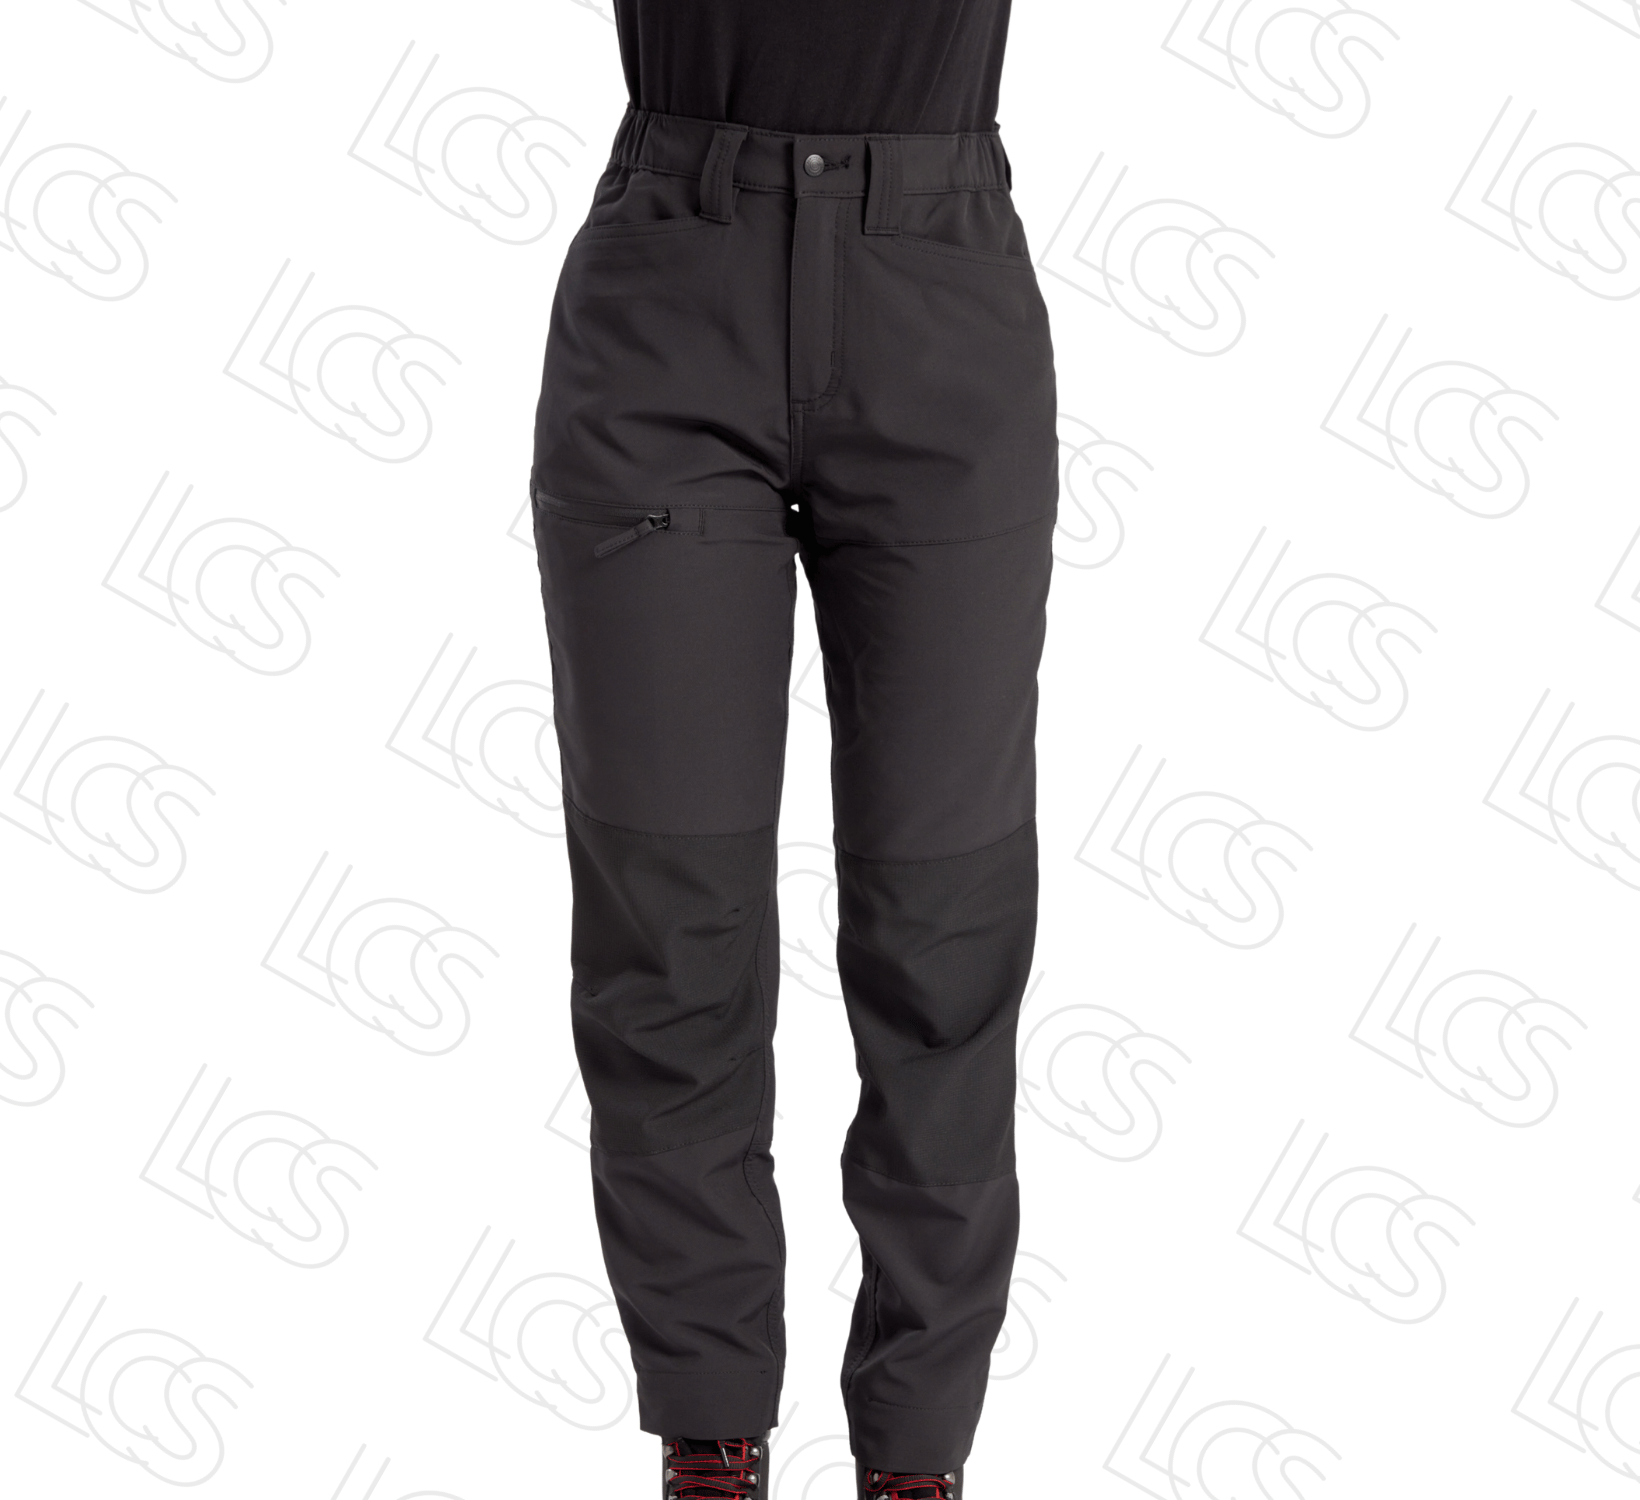 All Products - Offers - Clearance items - Clearance Trouser 28-32 waist -  Page 1 - LCS Embroidery LTD T/A LCS Workwear